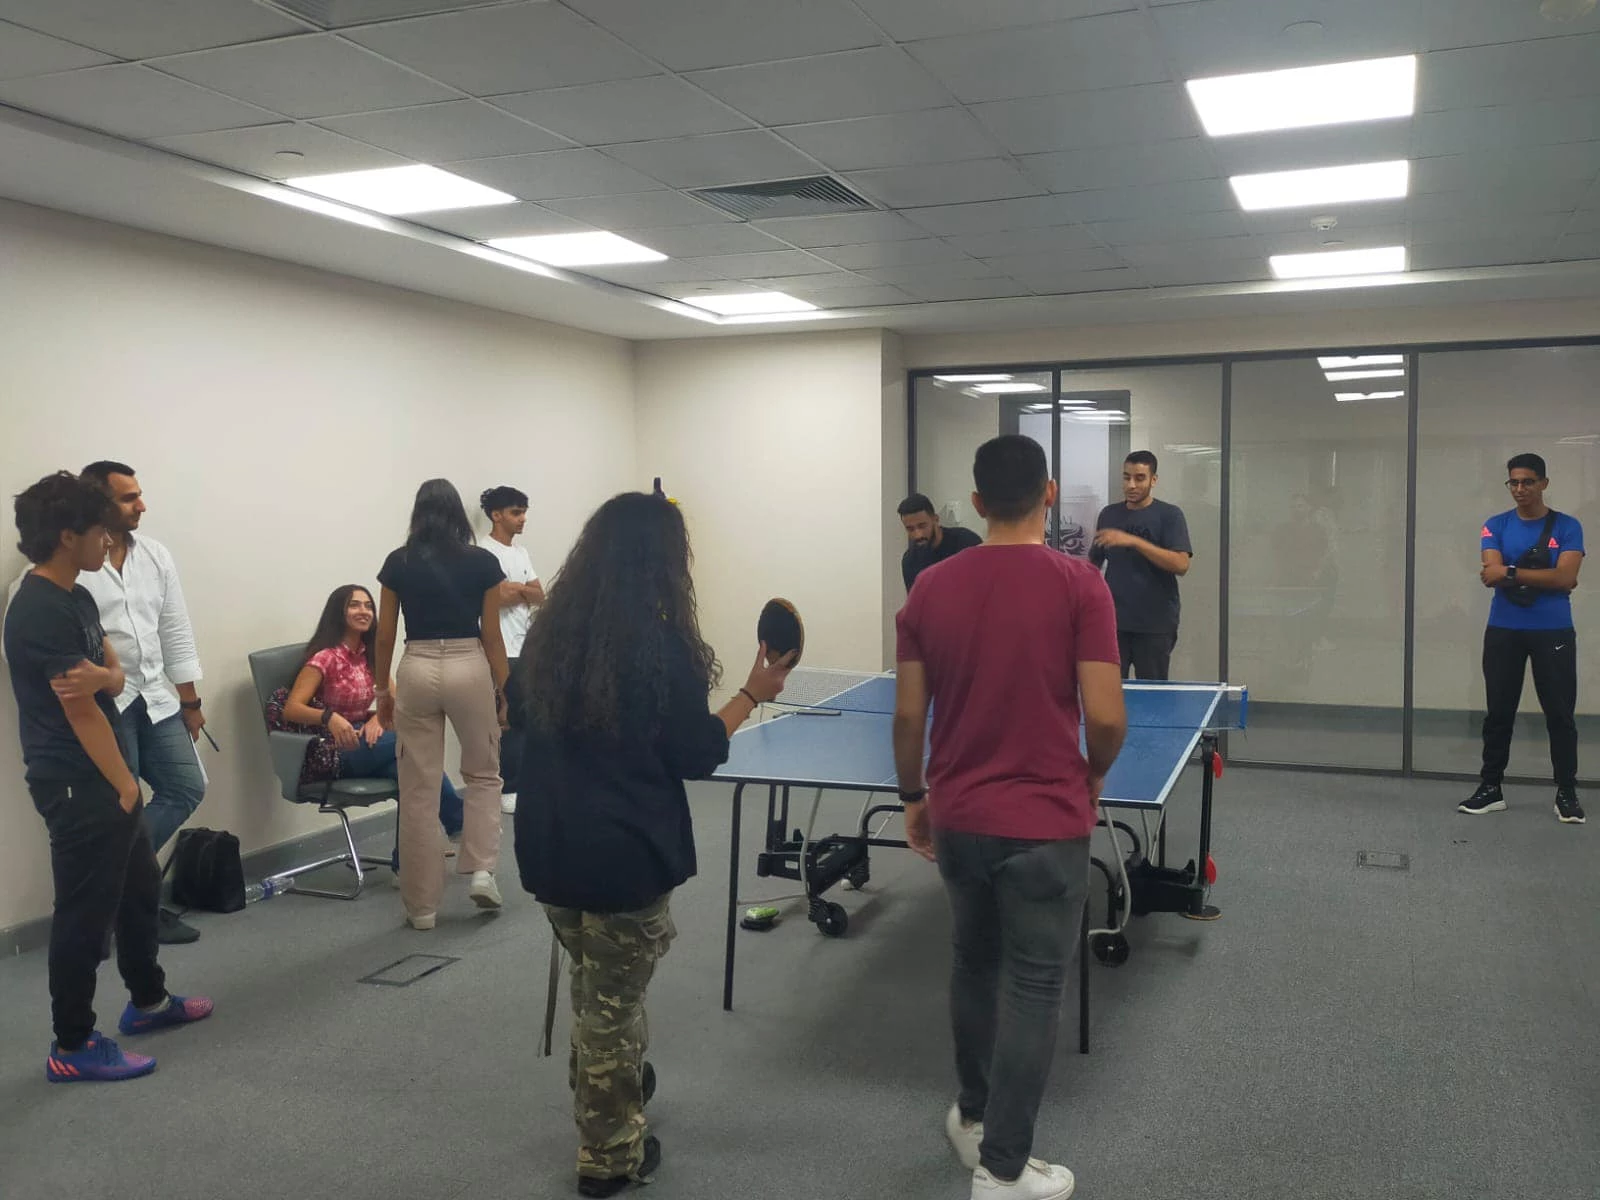 Free sports activities for branch students in their free time4